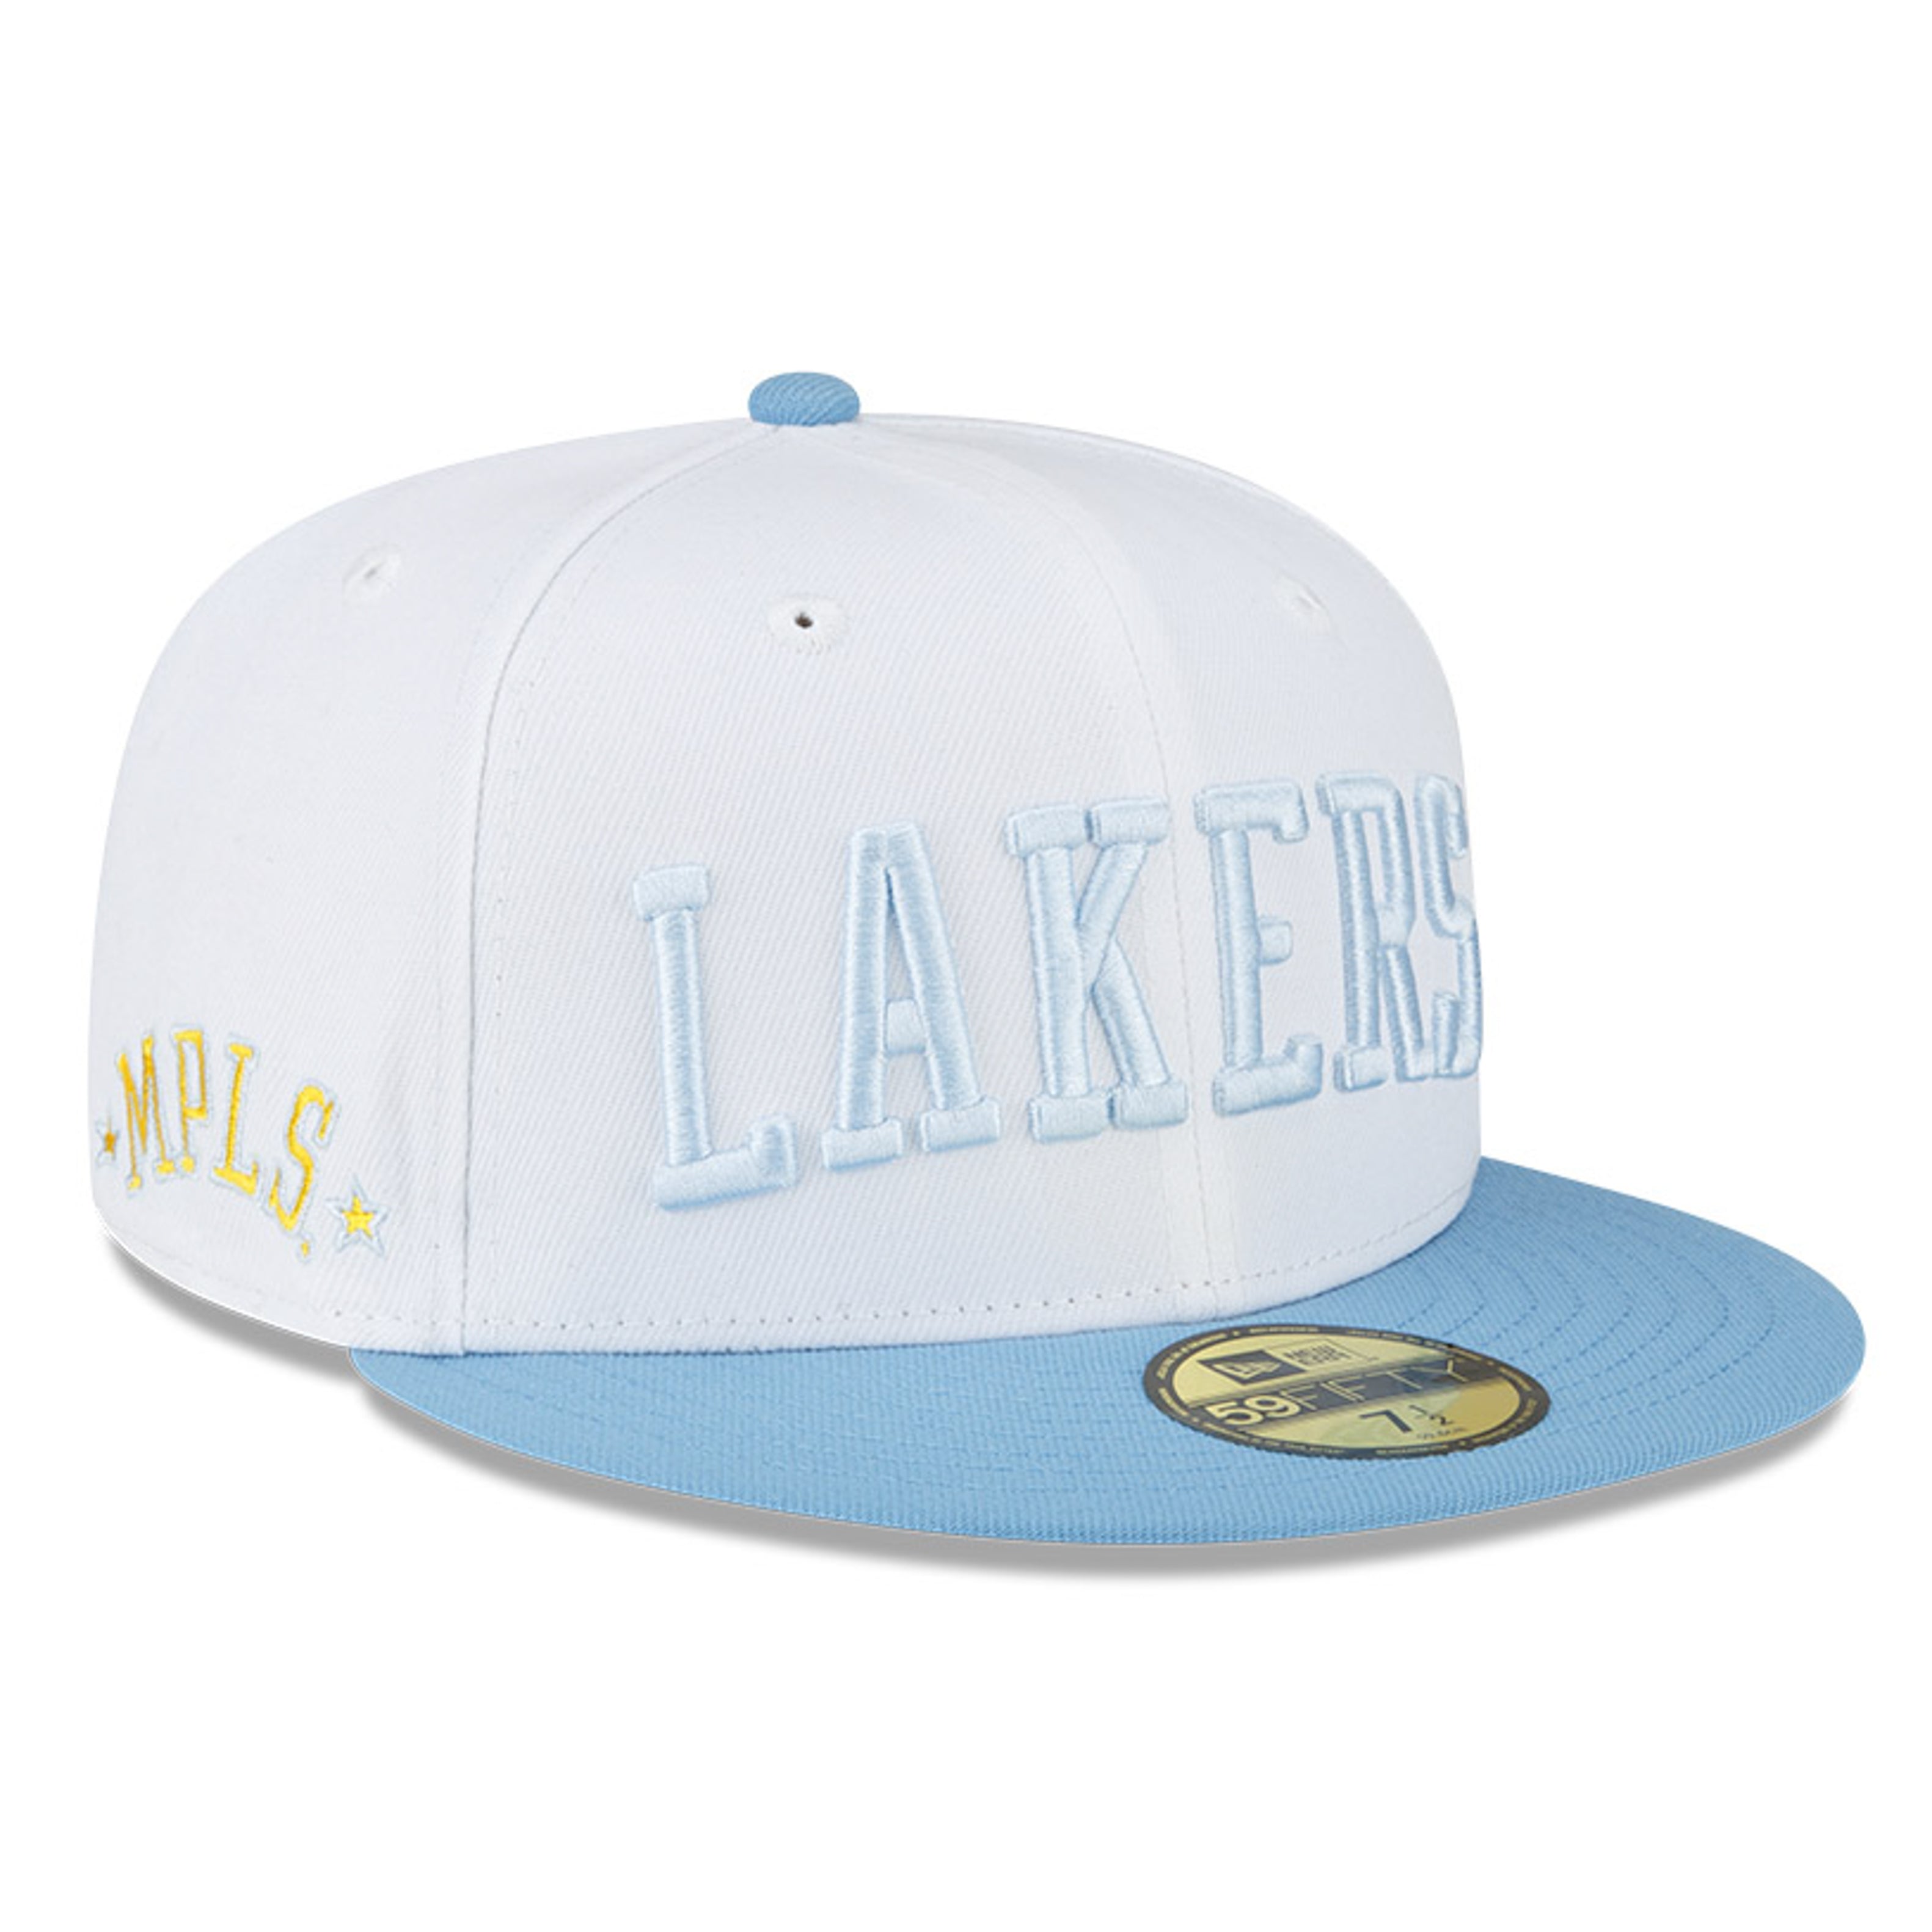 los angeles lakers white